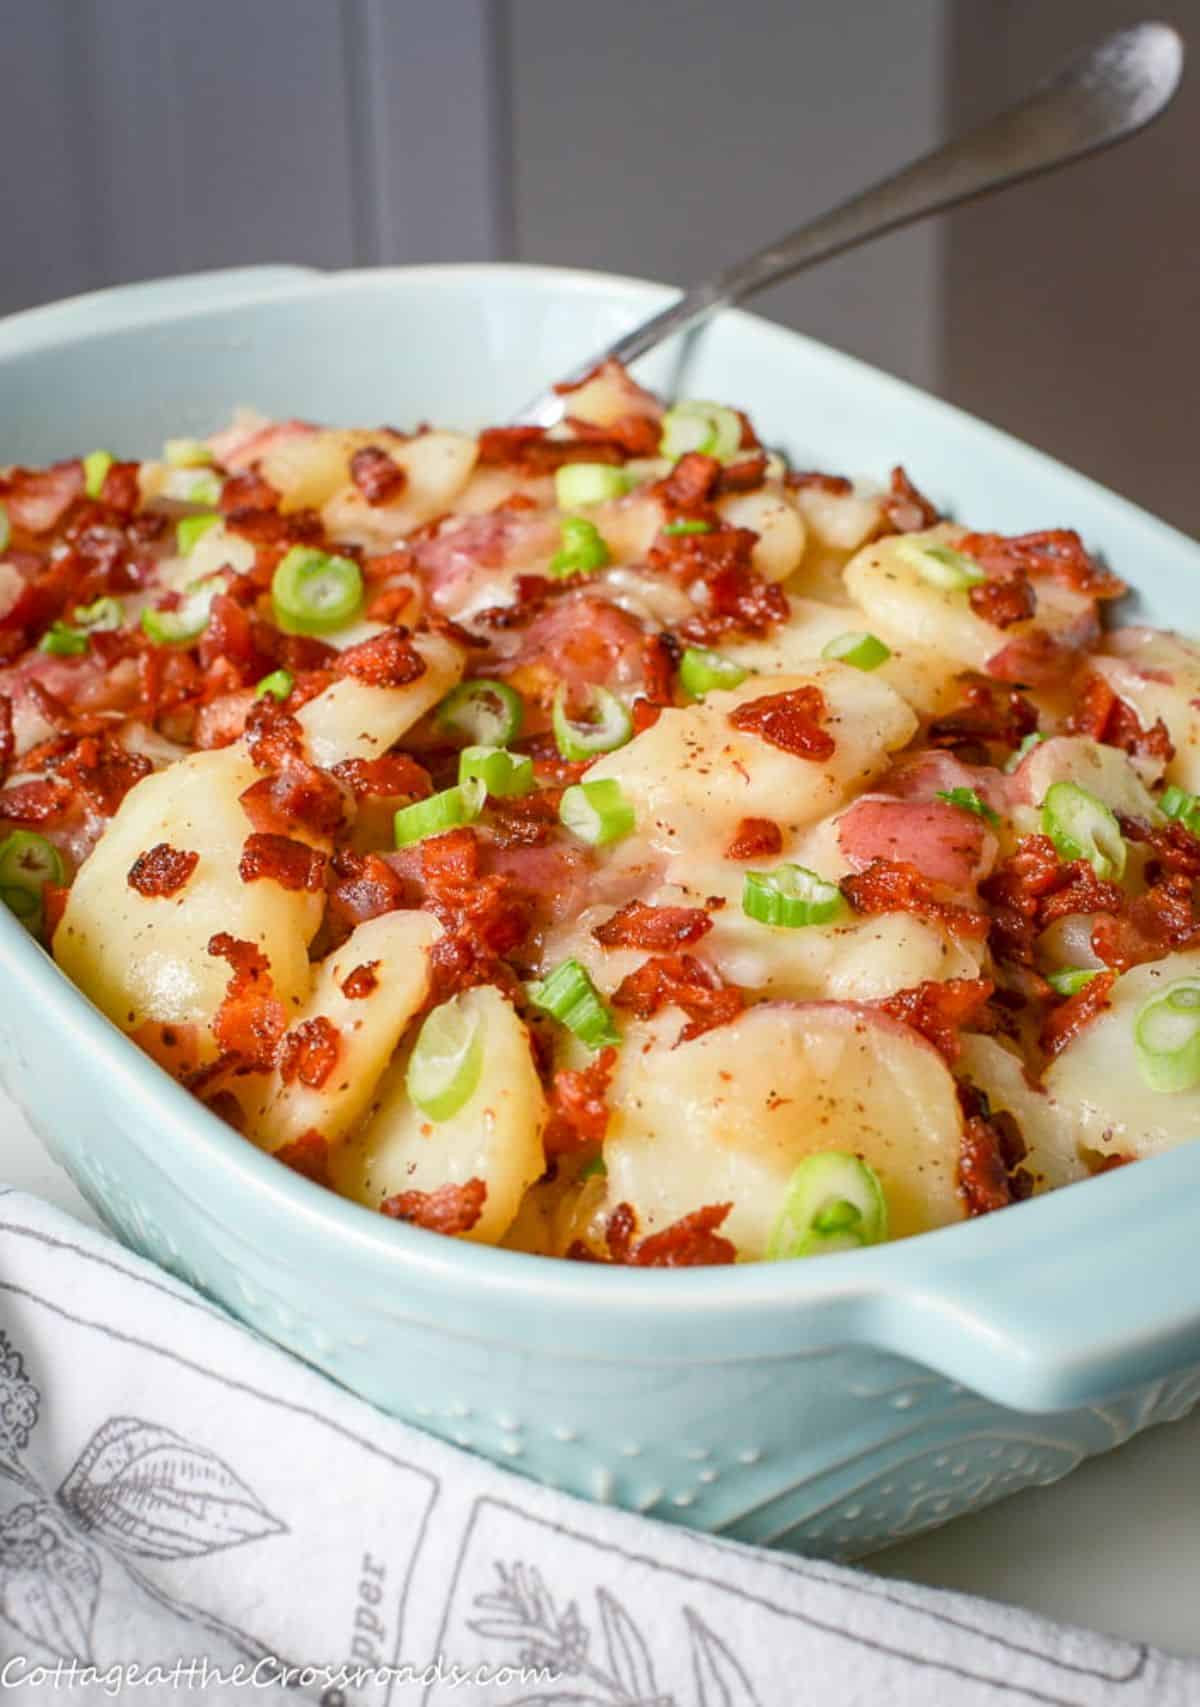 Delicious warm german potato salad with bacon in a blue casserole.